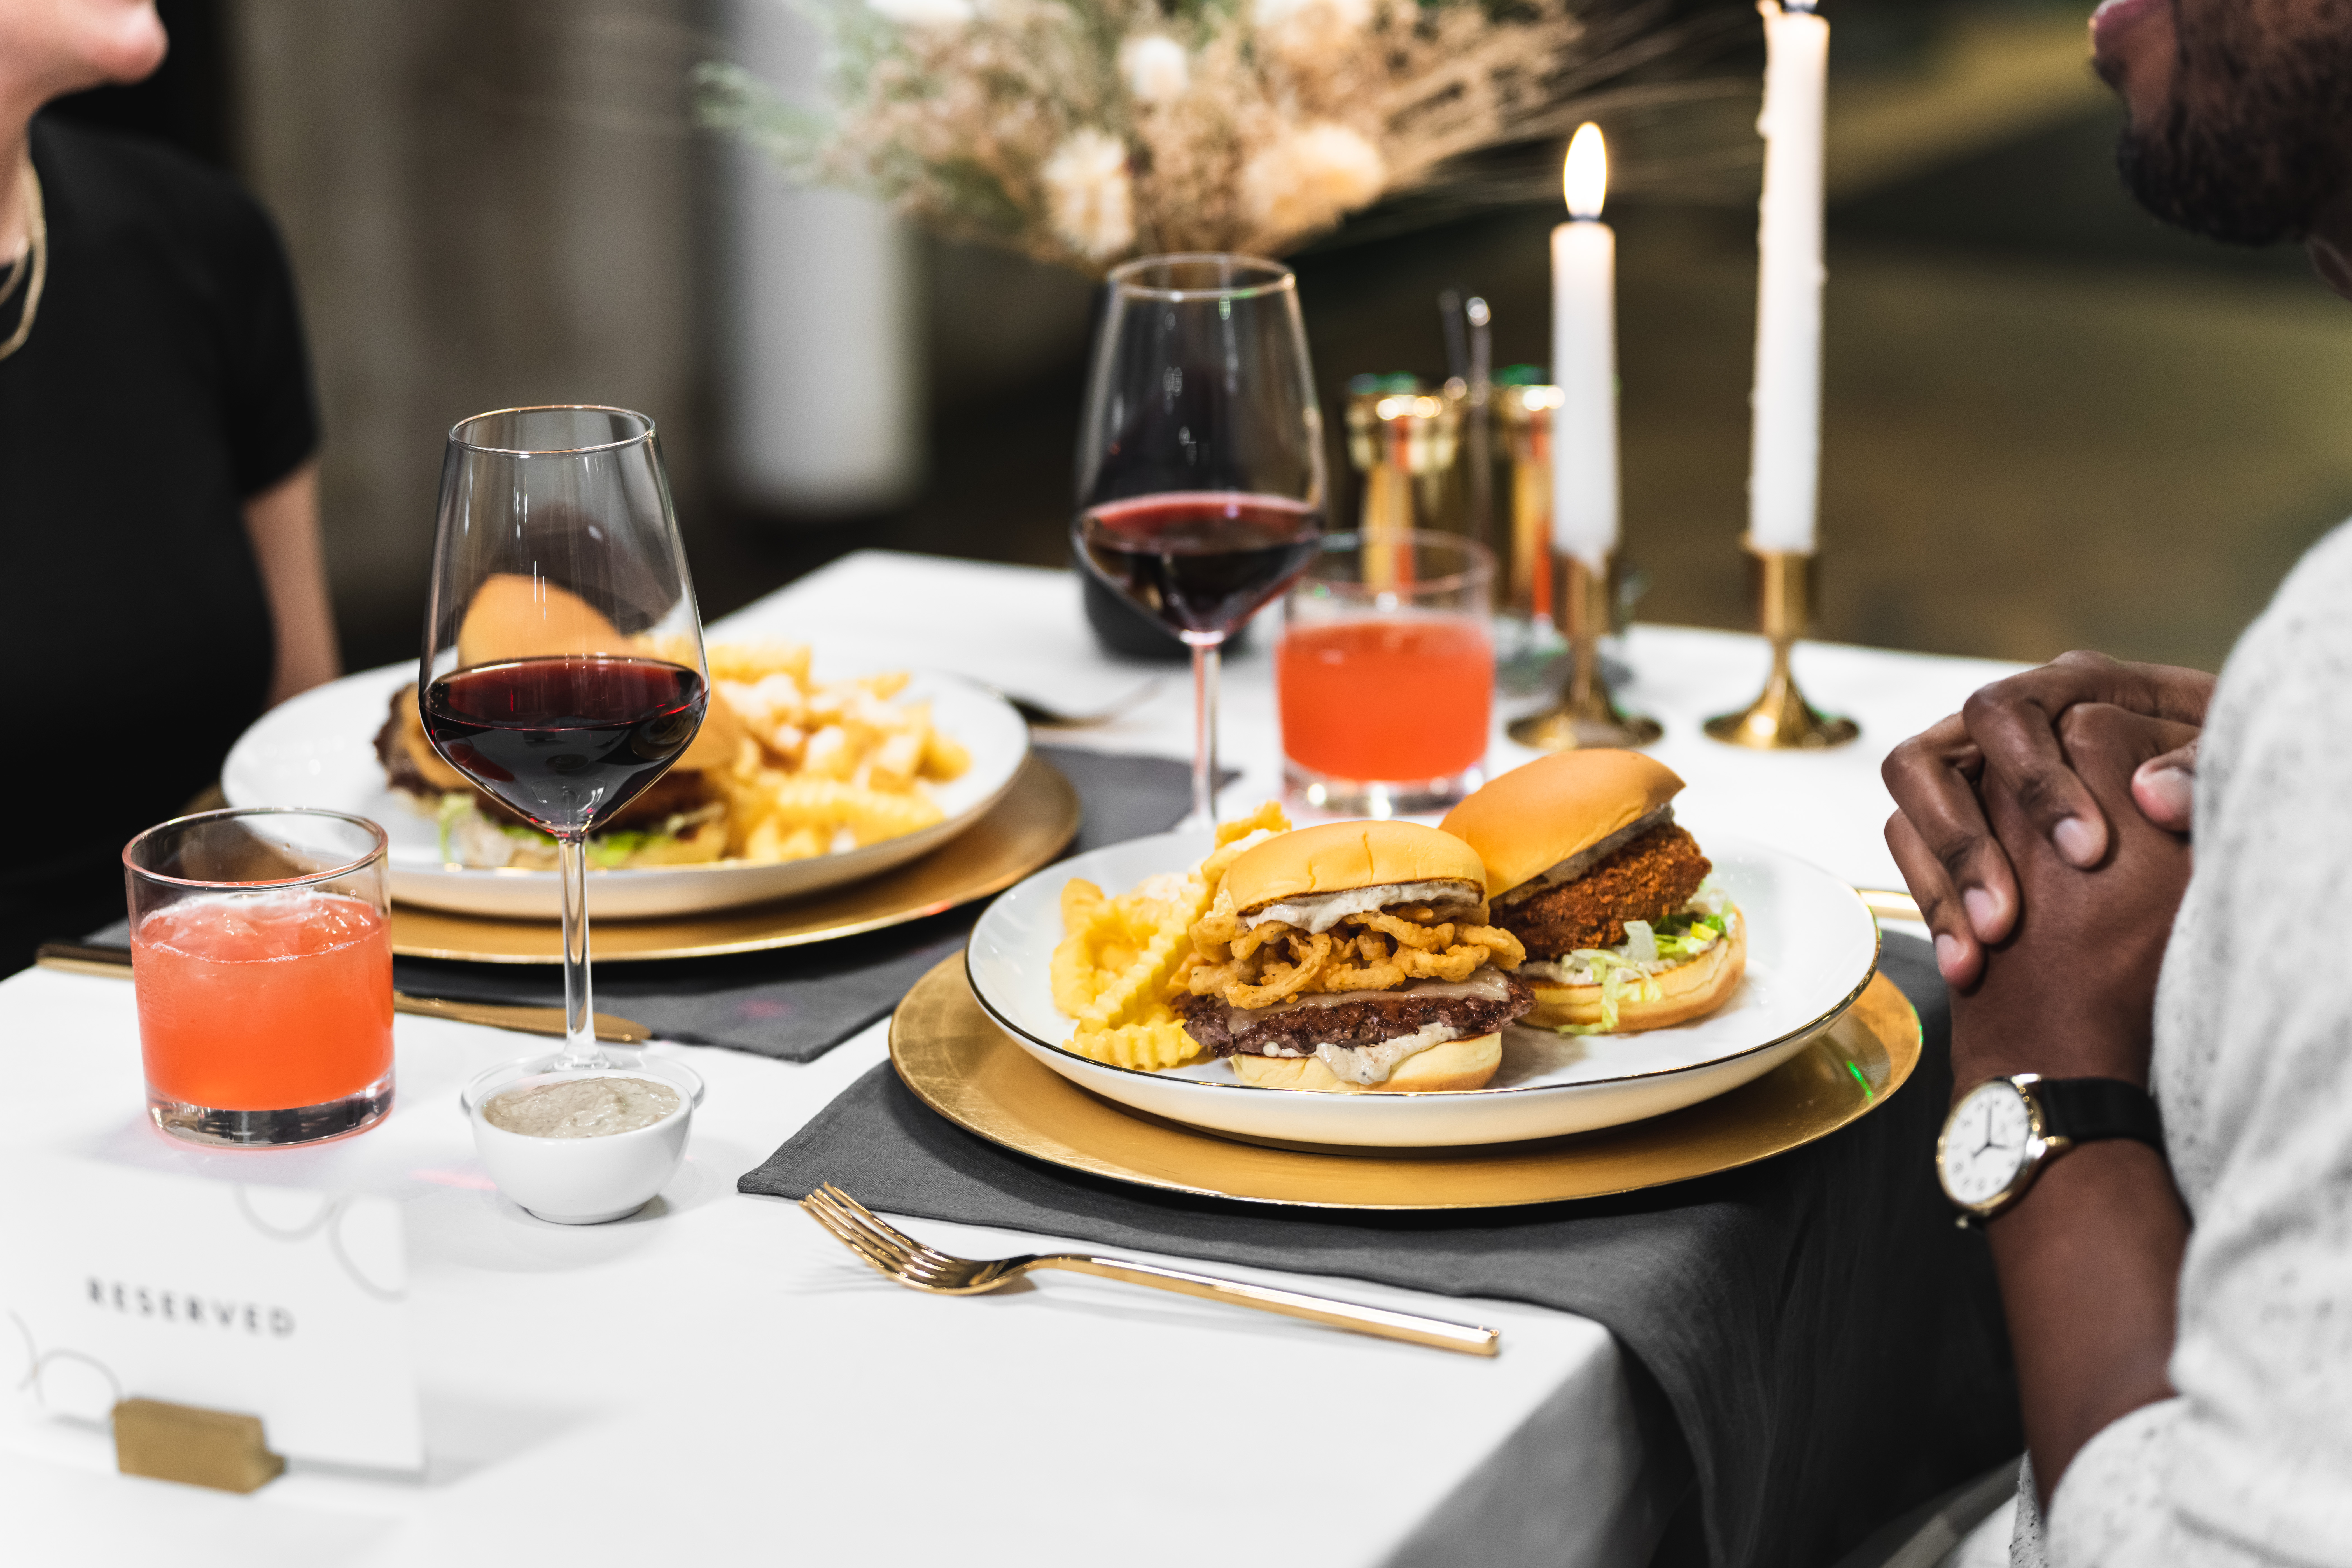 Burgers and crinkle-cut fries are presented on white plates beside golden silverware.